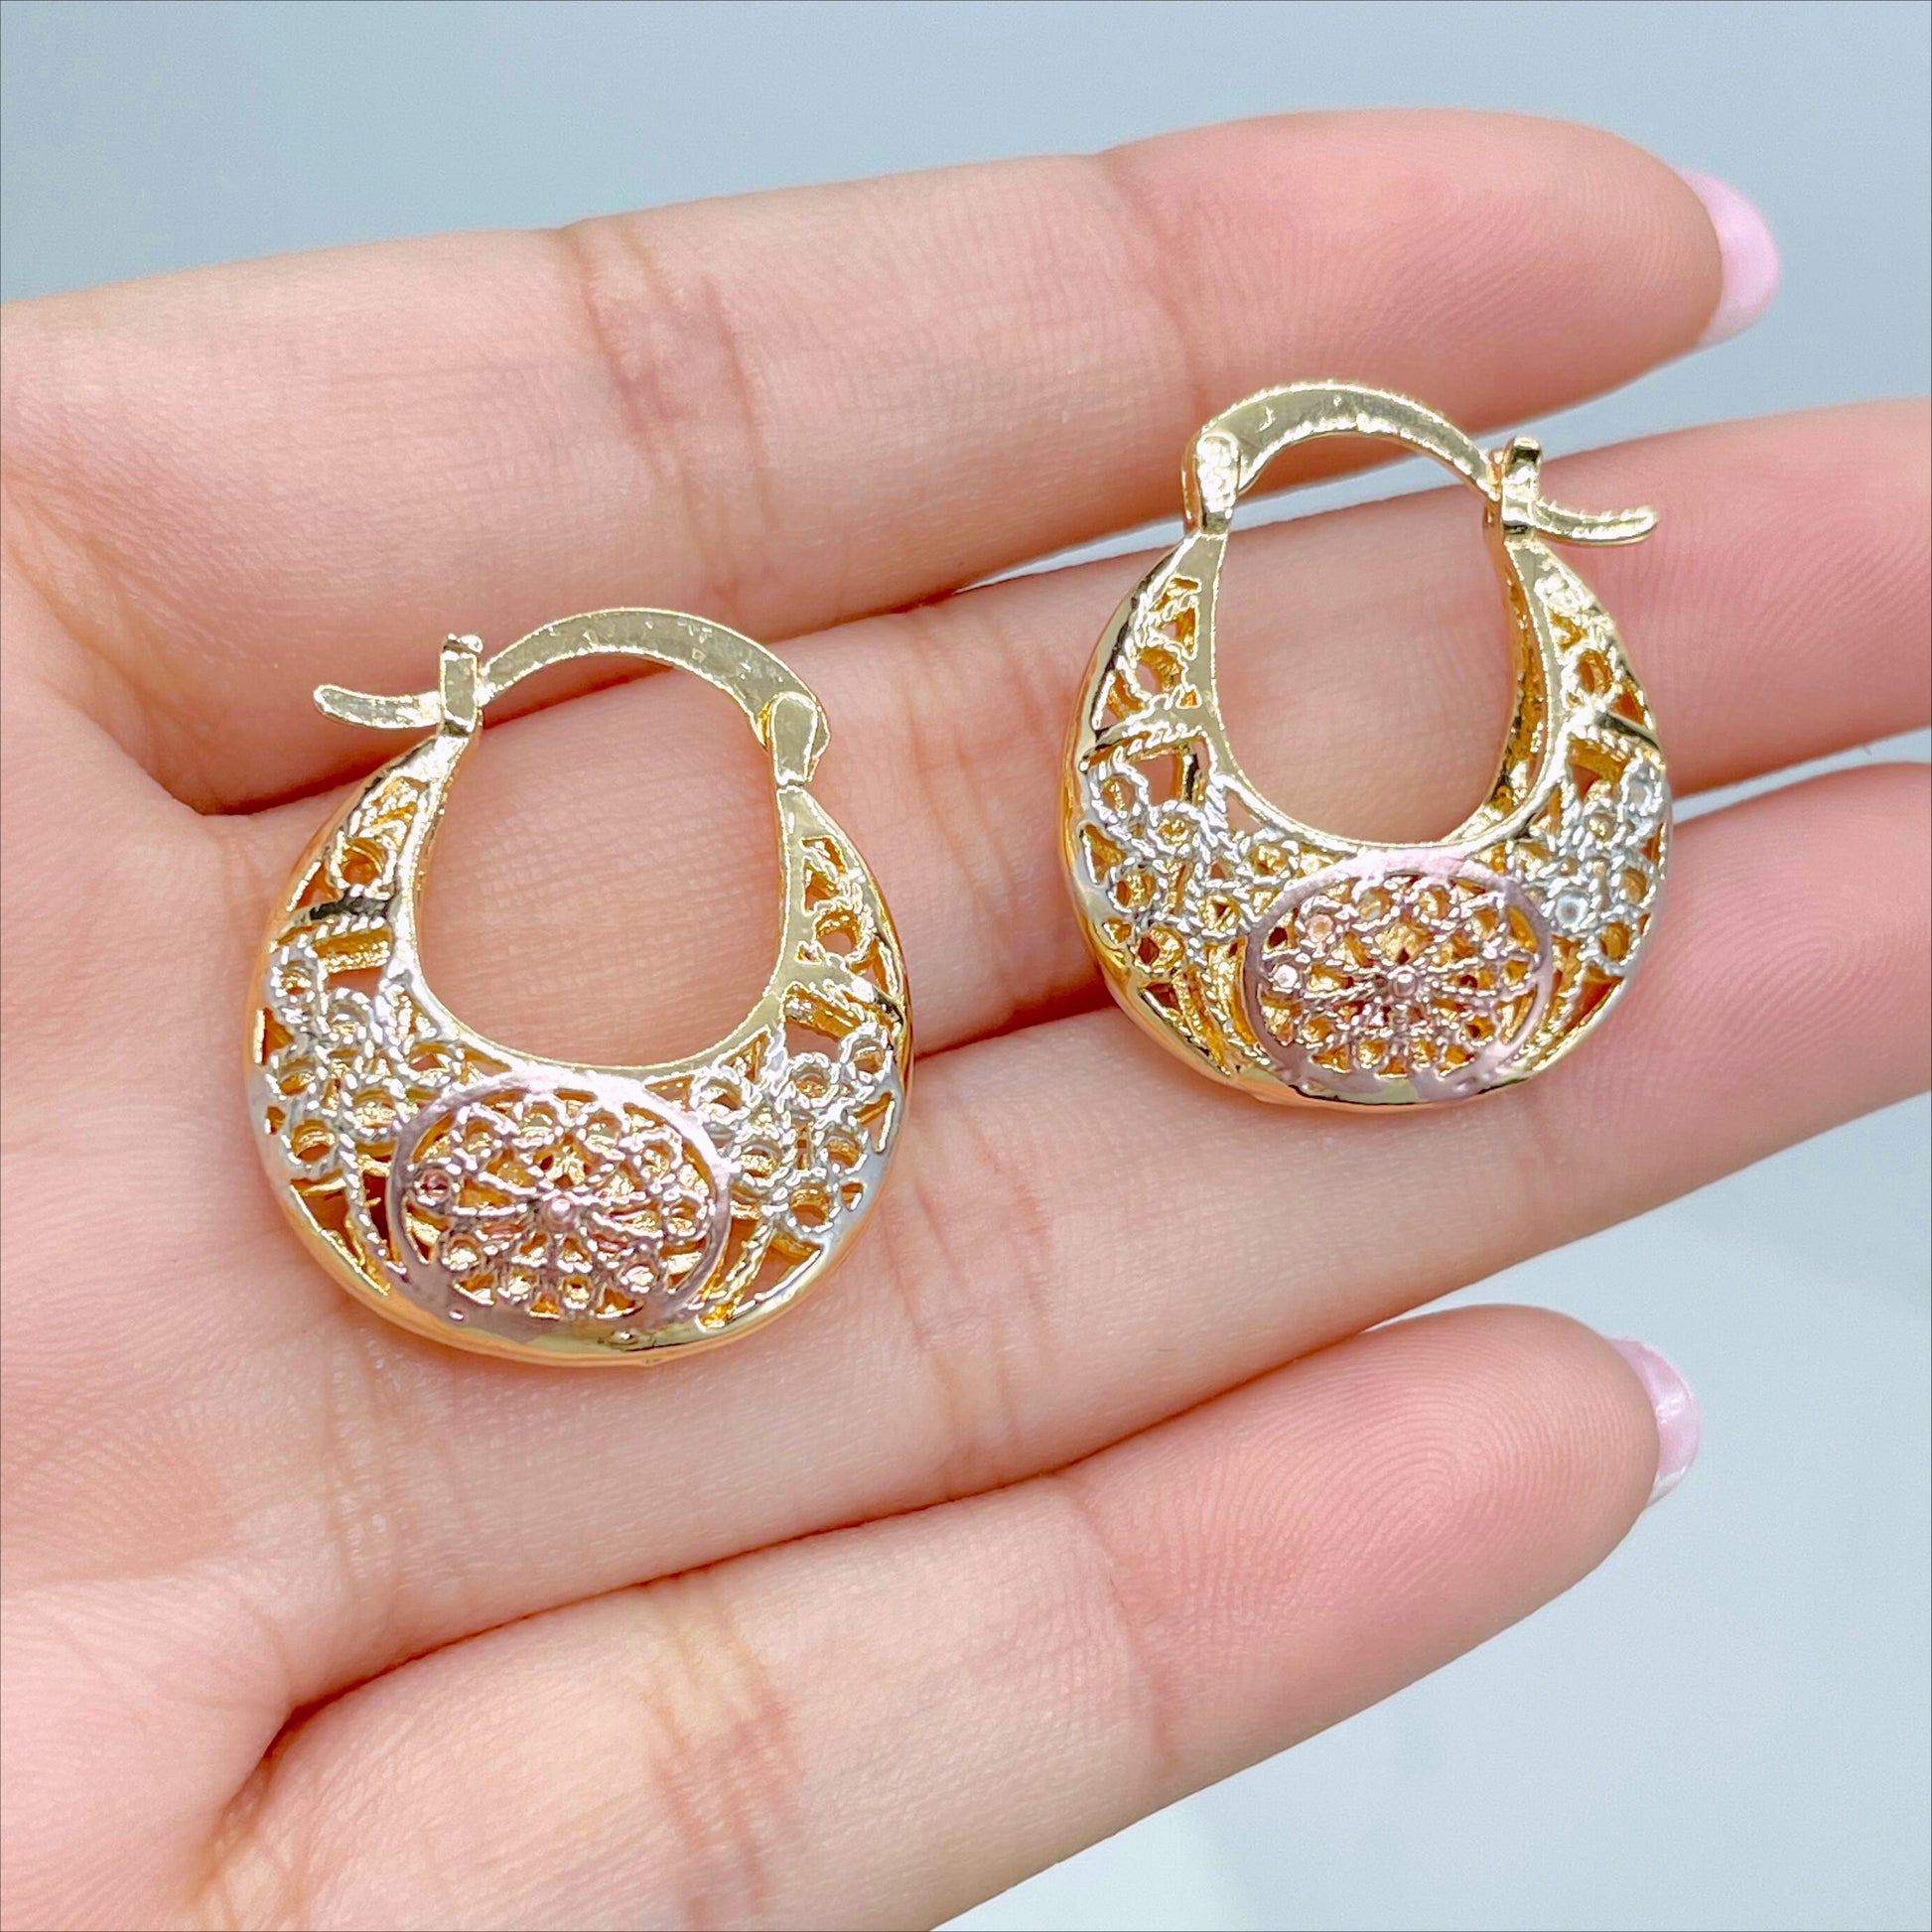 18k Gold Filled, Three Color 21mm Basket Earrings, 7mm Thickness Wholesale Jewelry Making Supplies